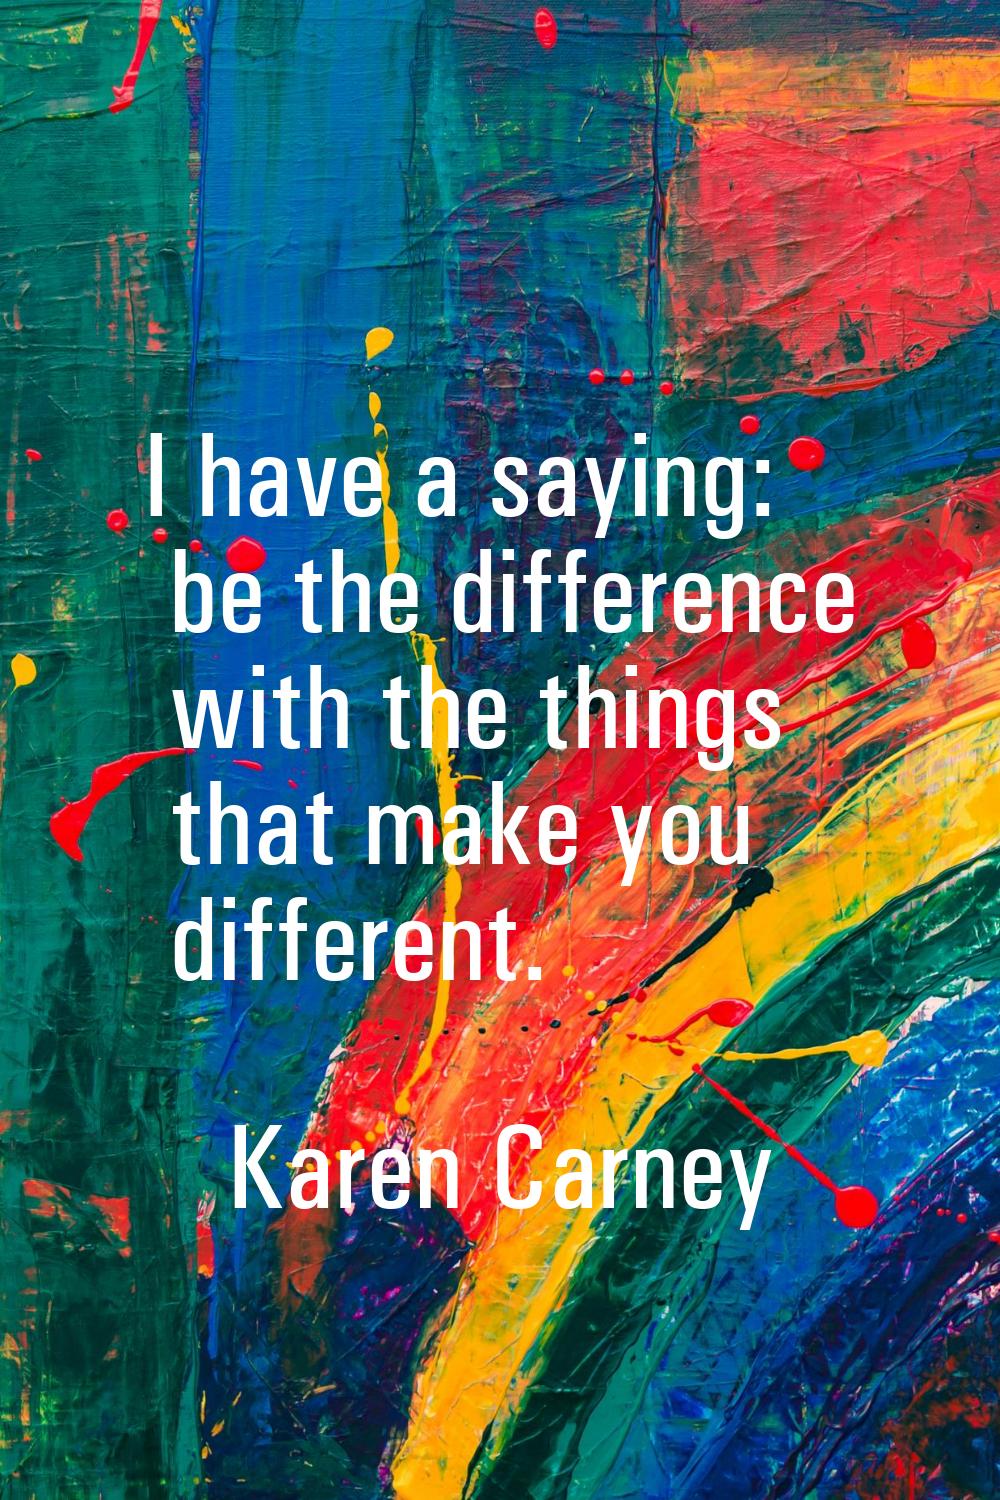 I have a saying: be the difference with the things that make you different.